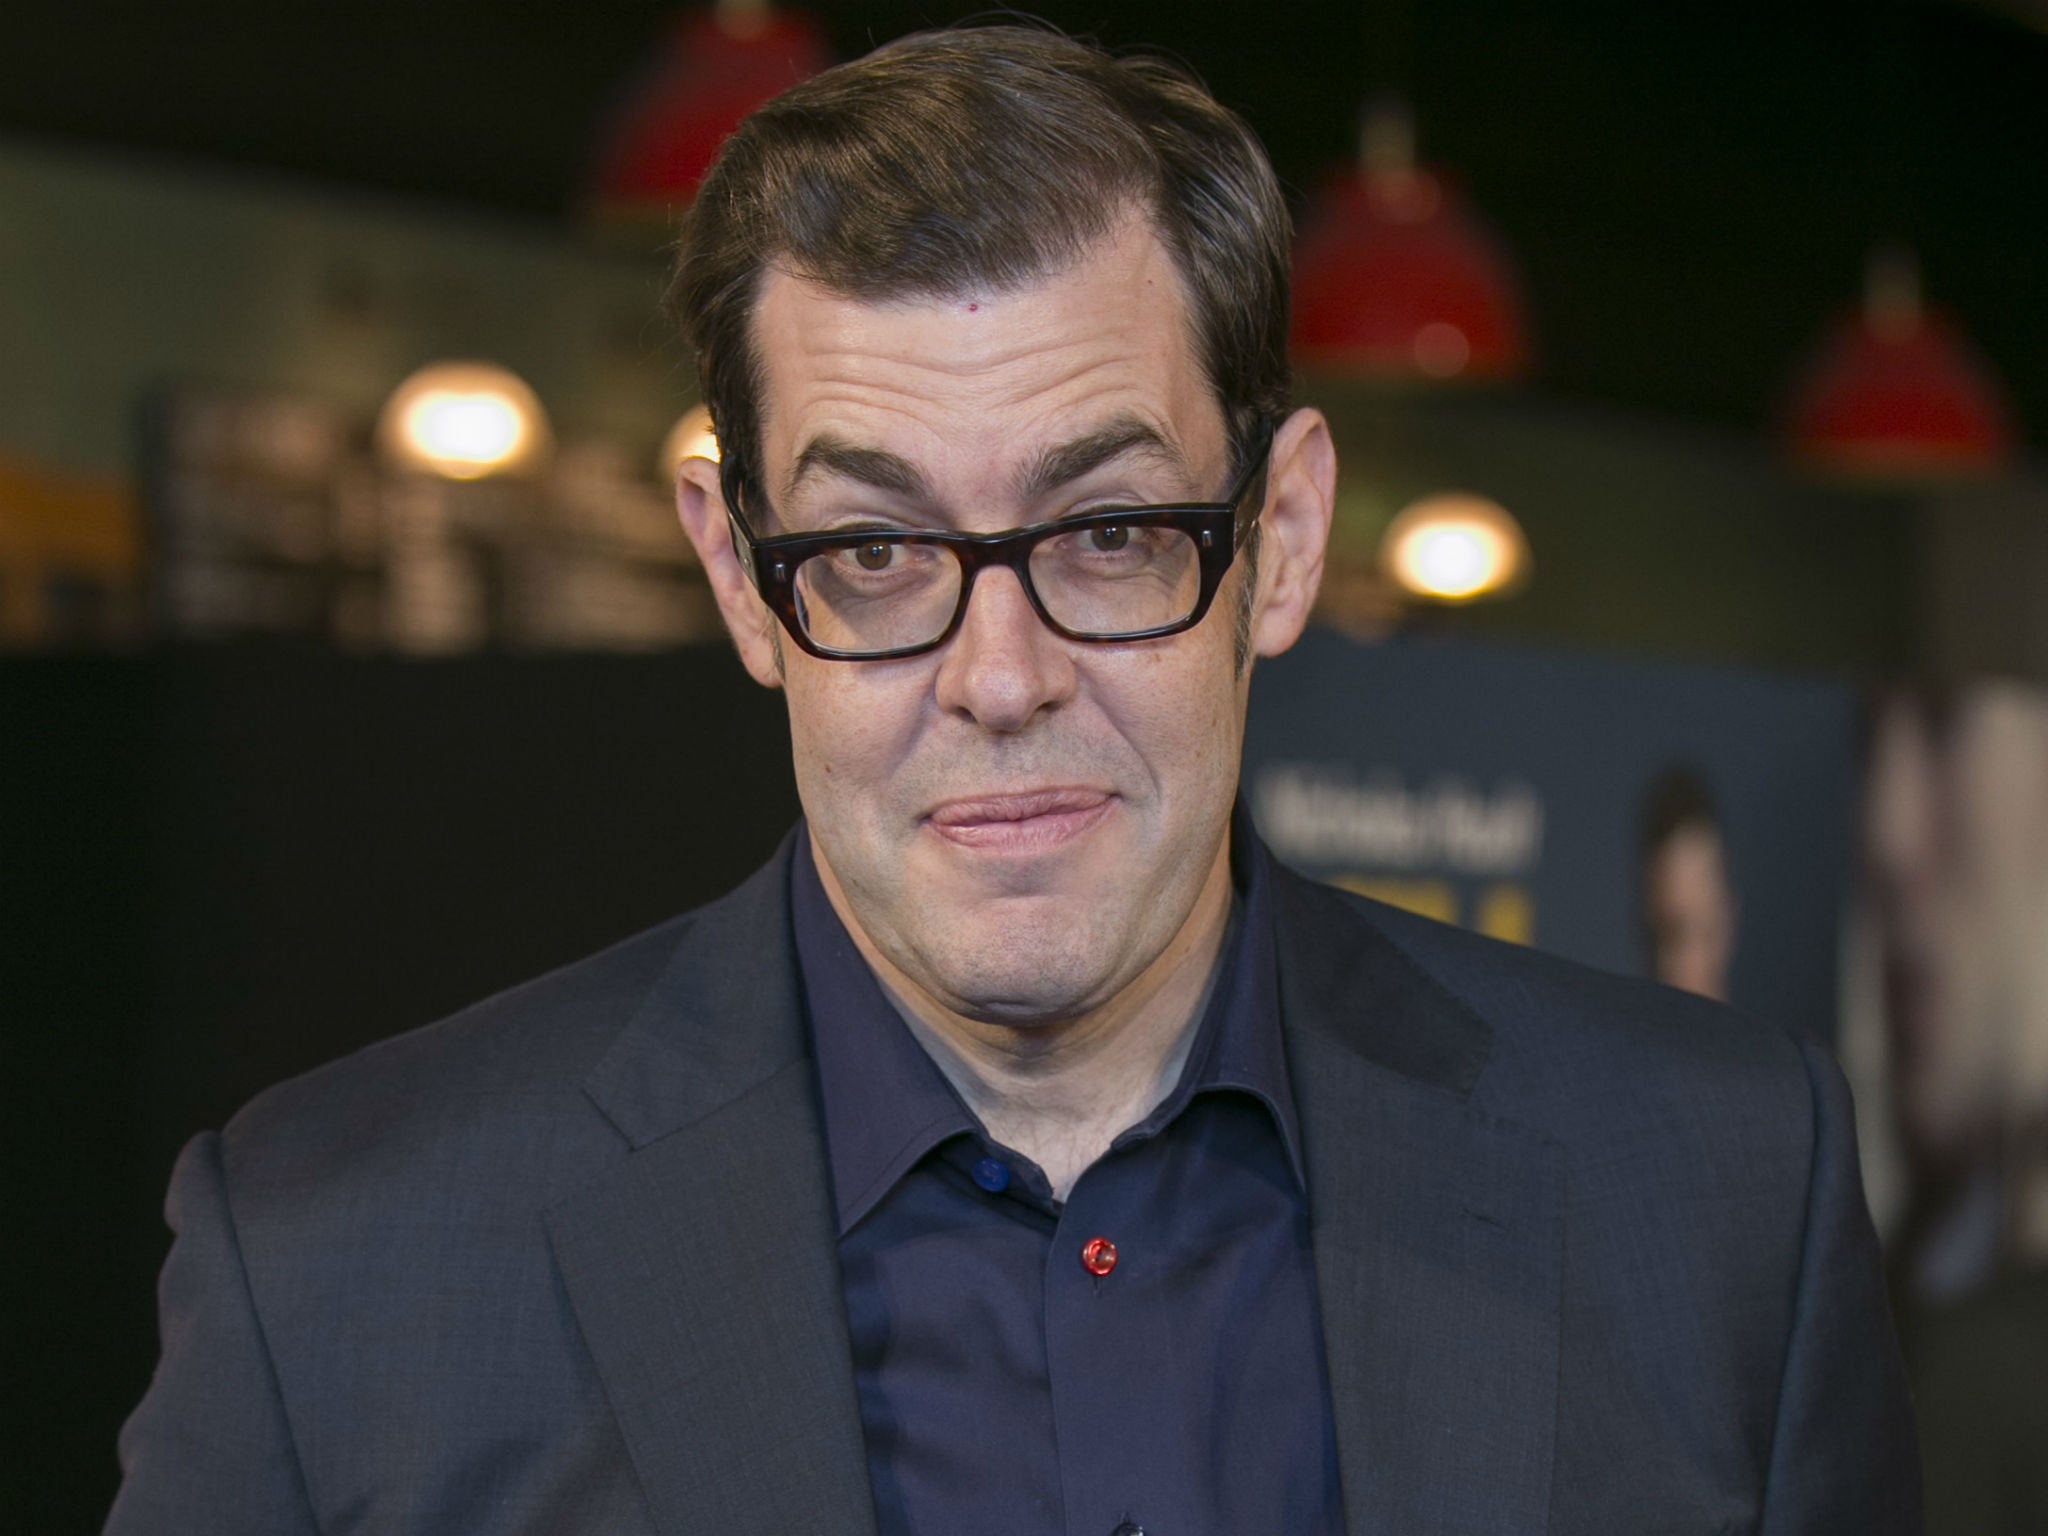 Richard Osman is best known for delivering the results on Pointless, so he has experience in this field